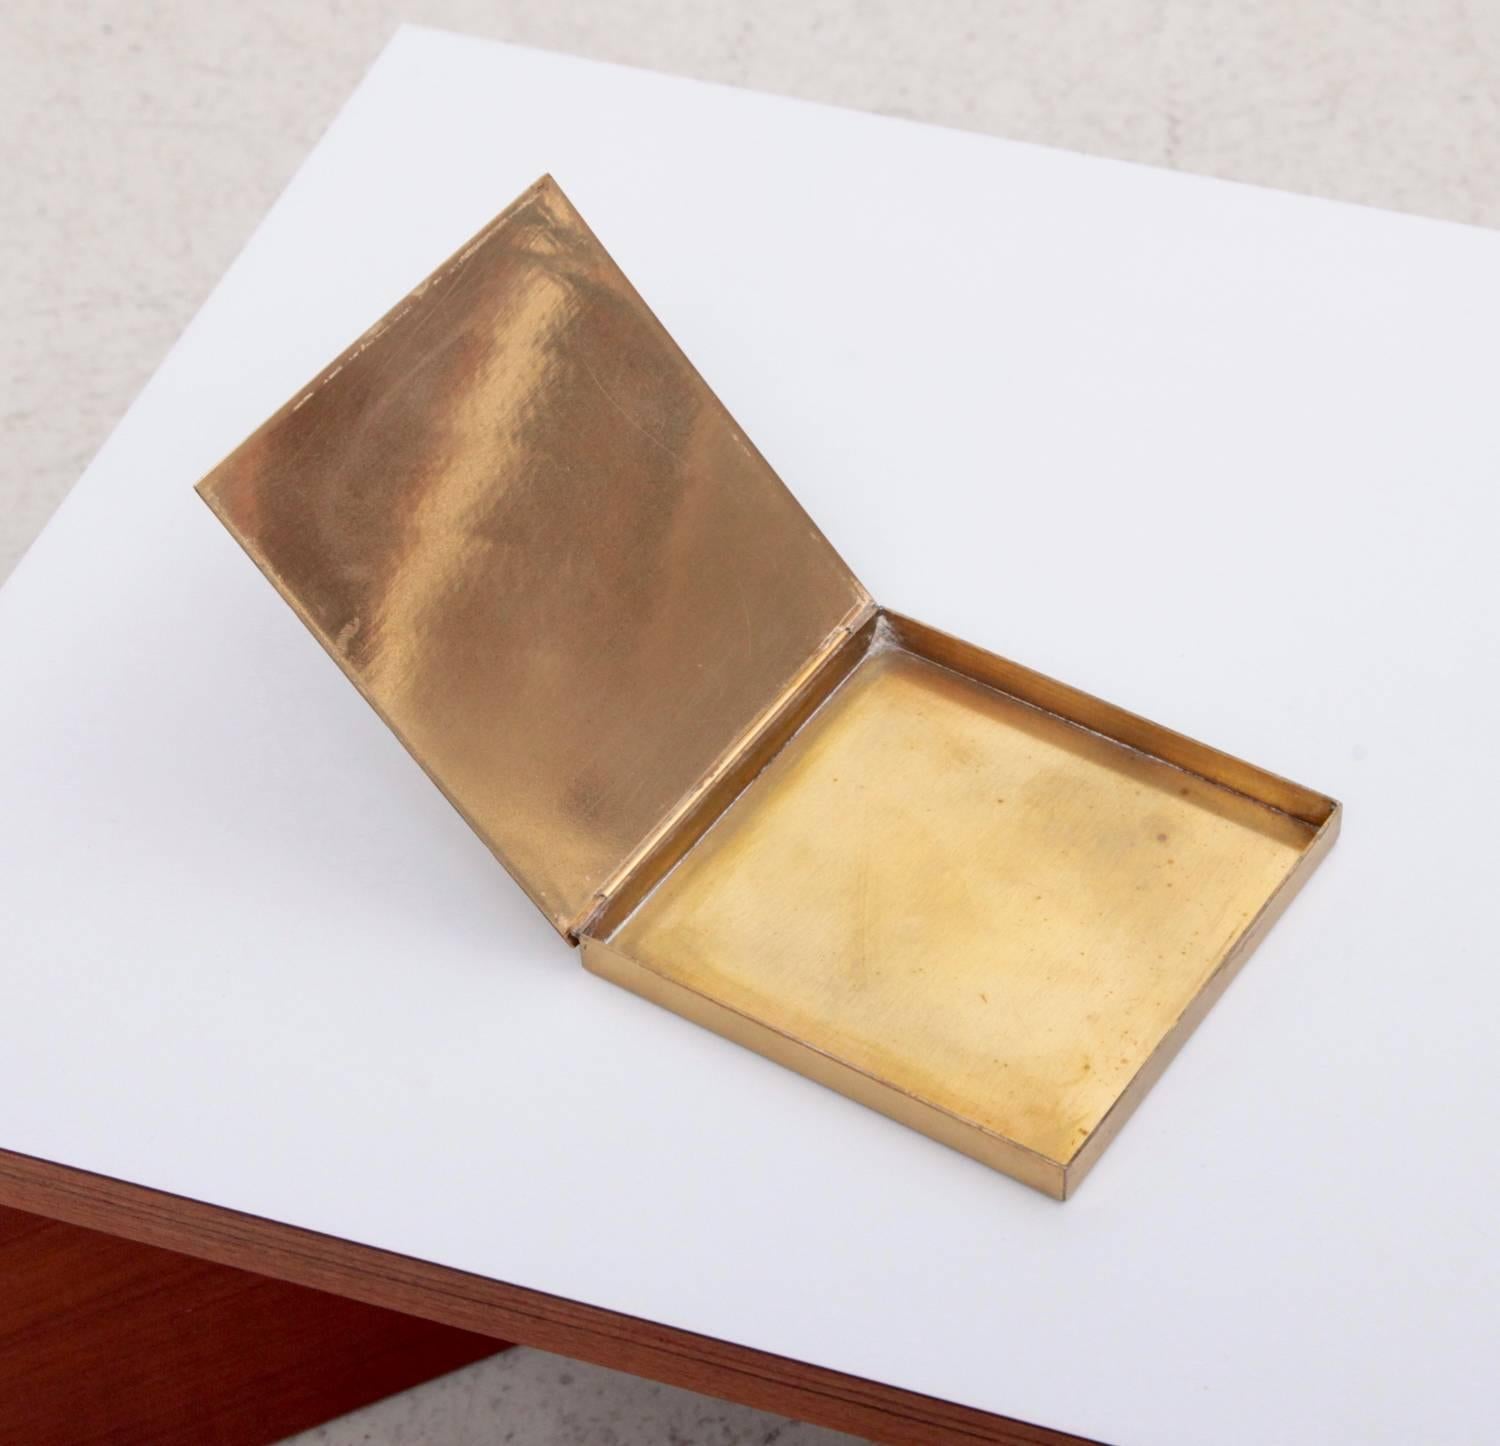 Brass cigarette case or box designed by Gabriella Crespi. The box is signed and a rare and hard to find collectors item.